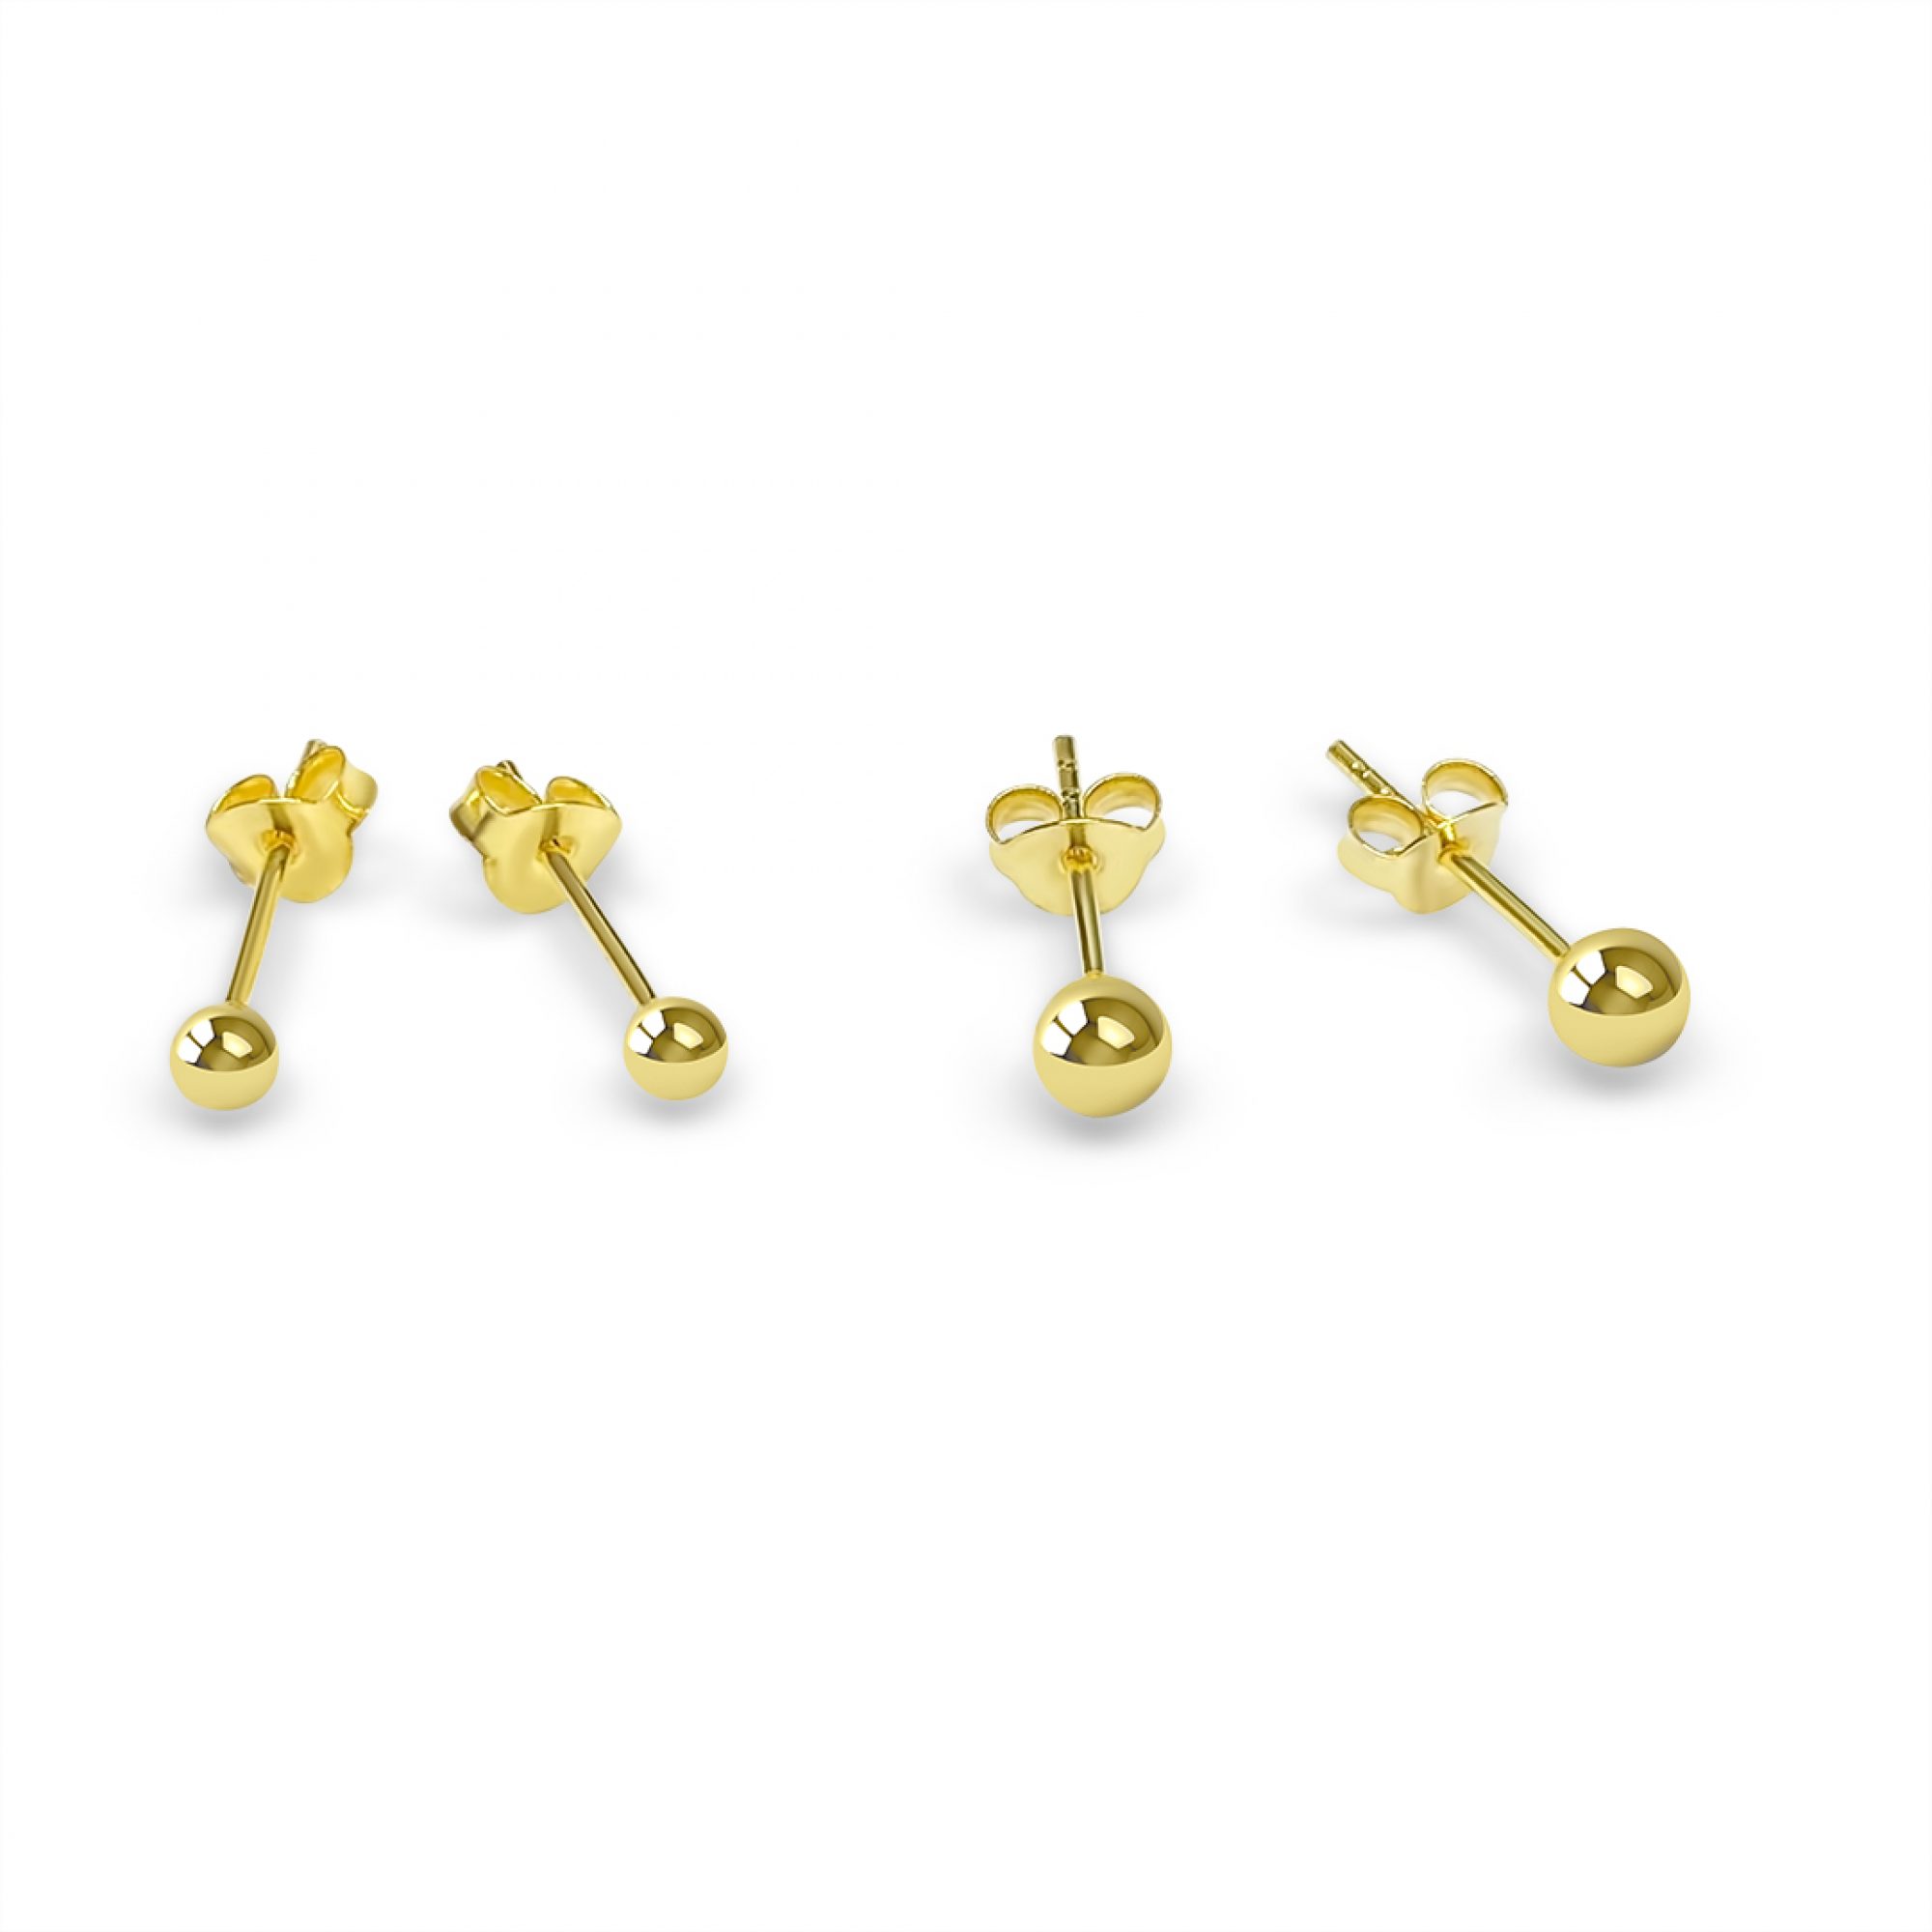 Gold plated stud earrings